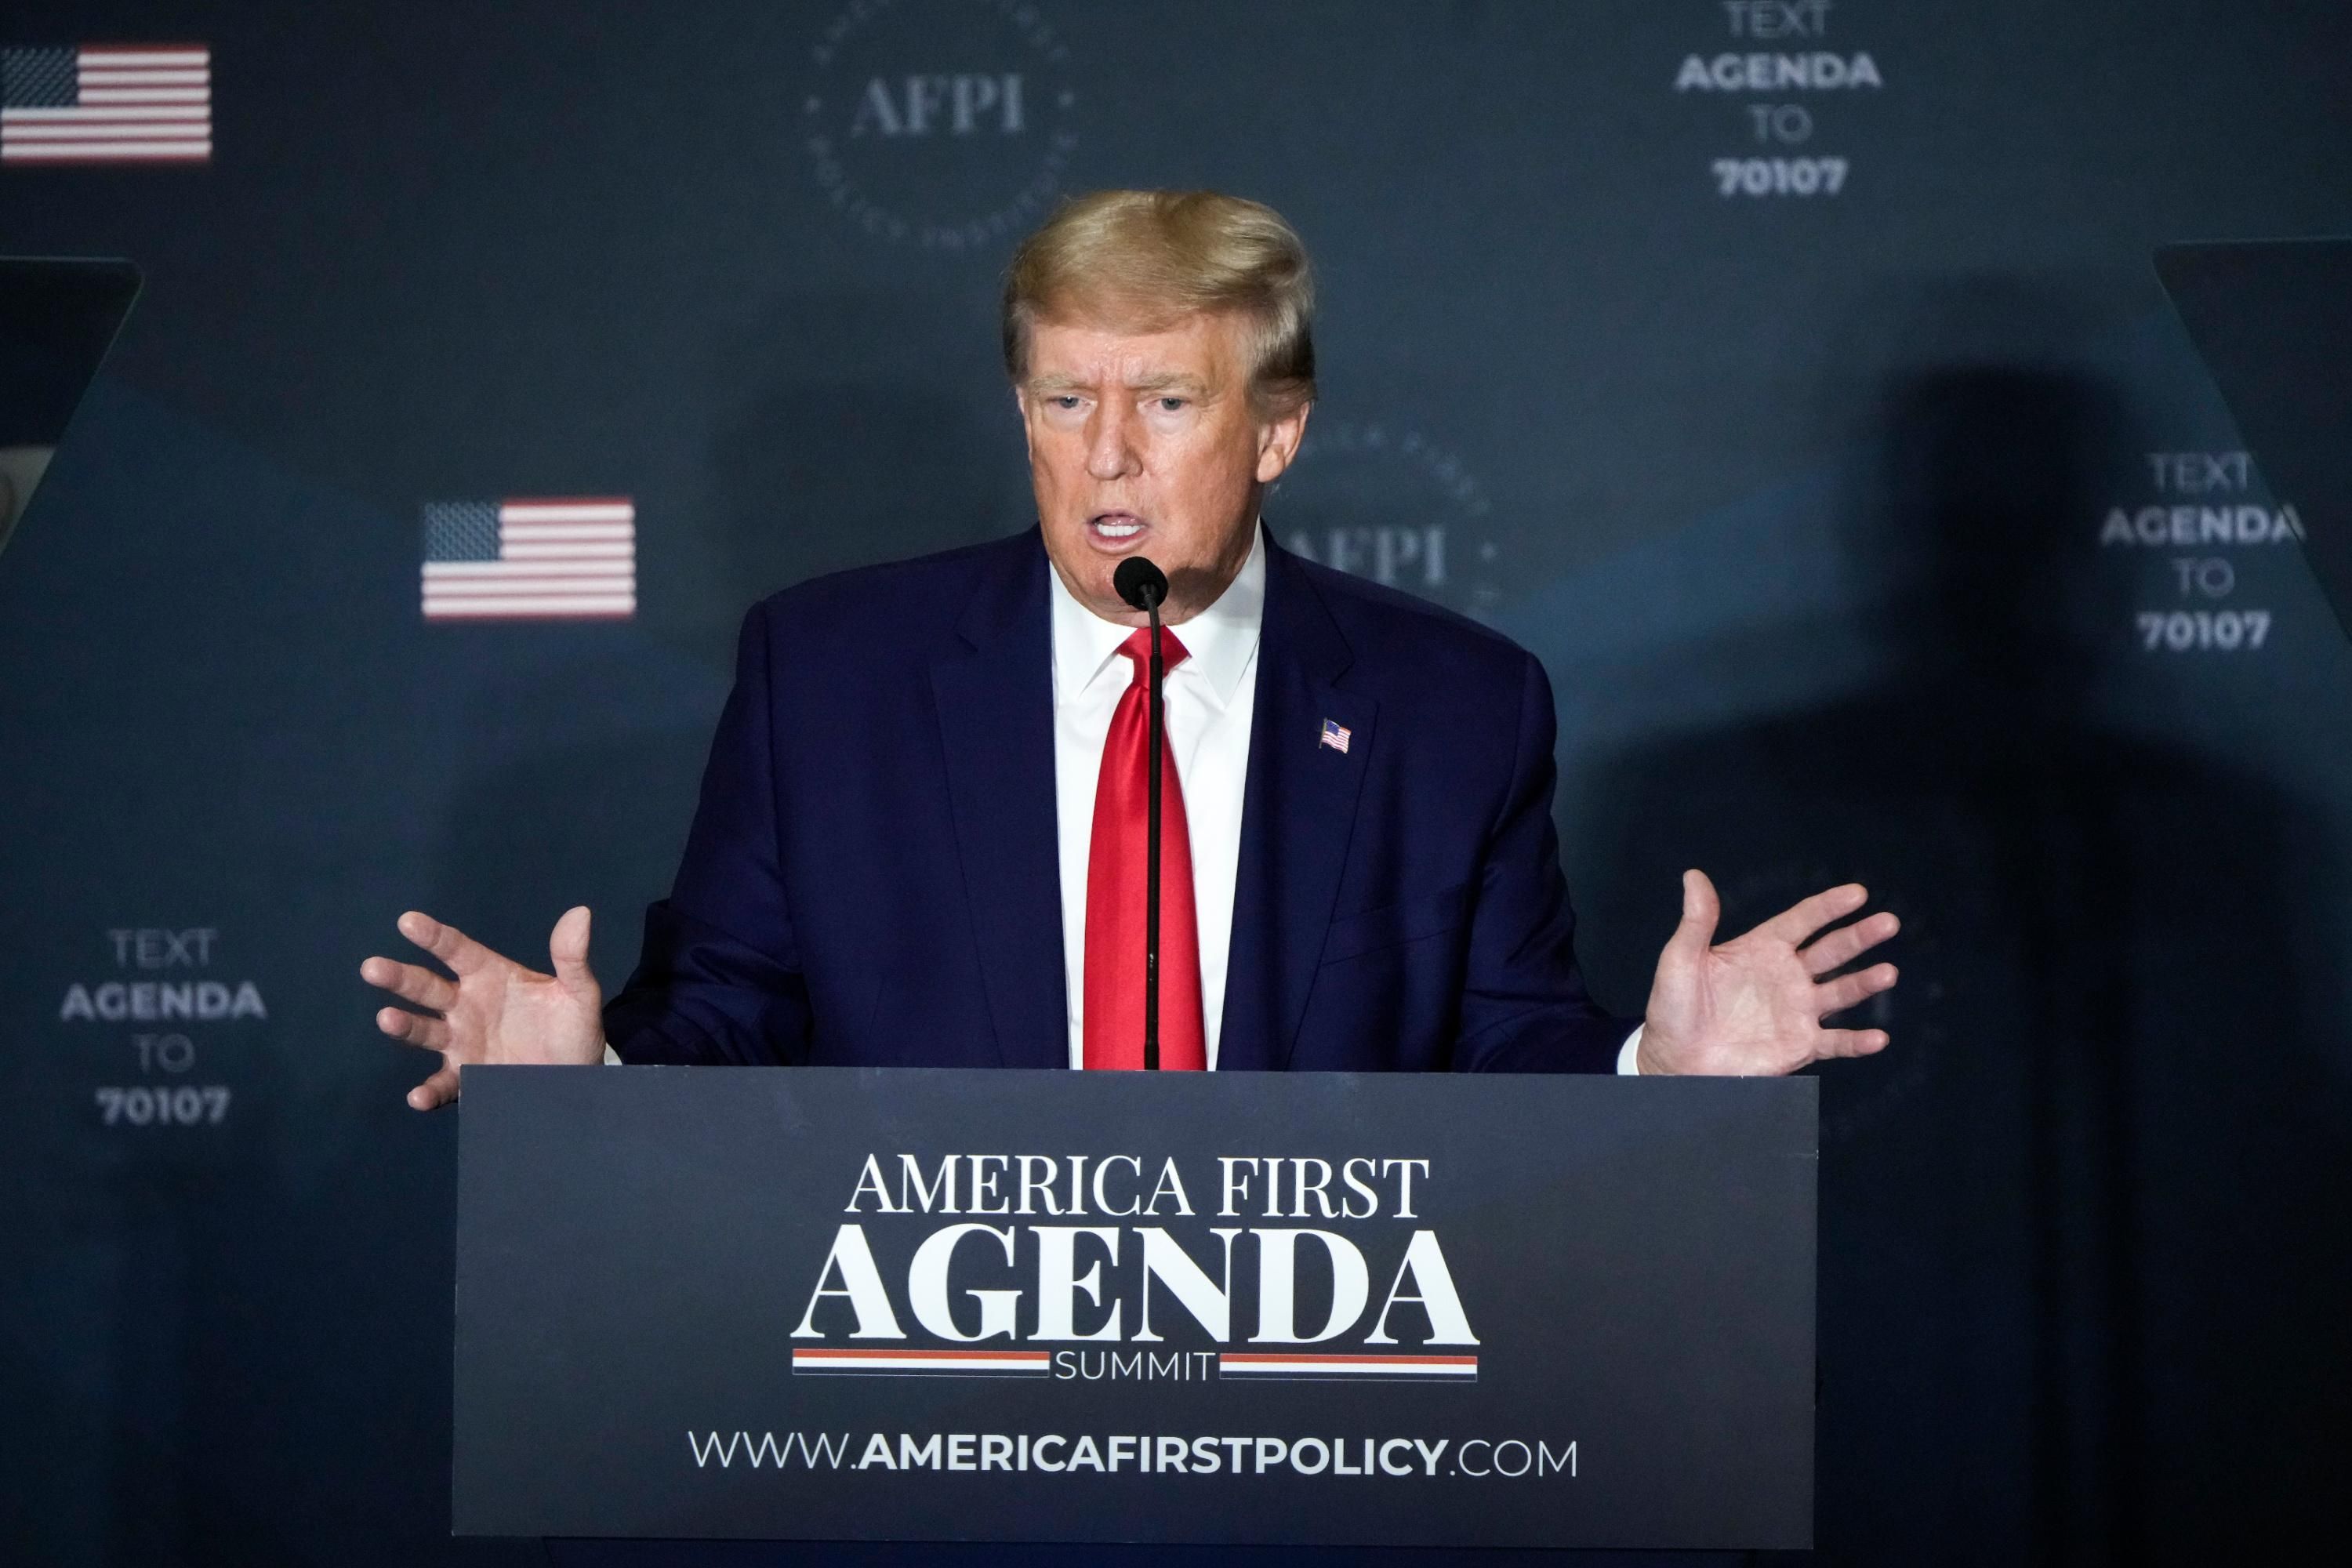 Former President Donald Trump speaks at a think tank summit